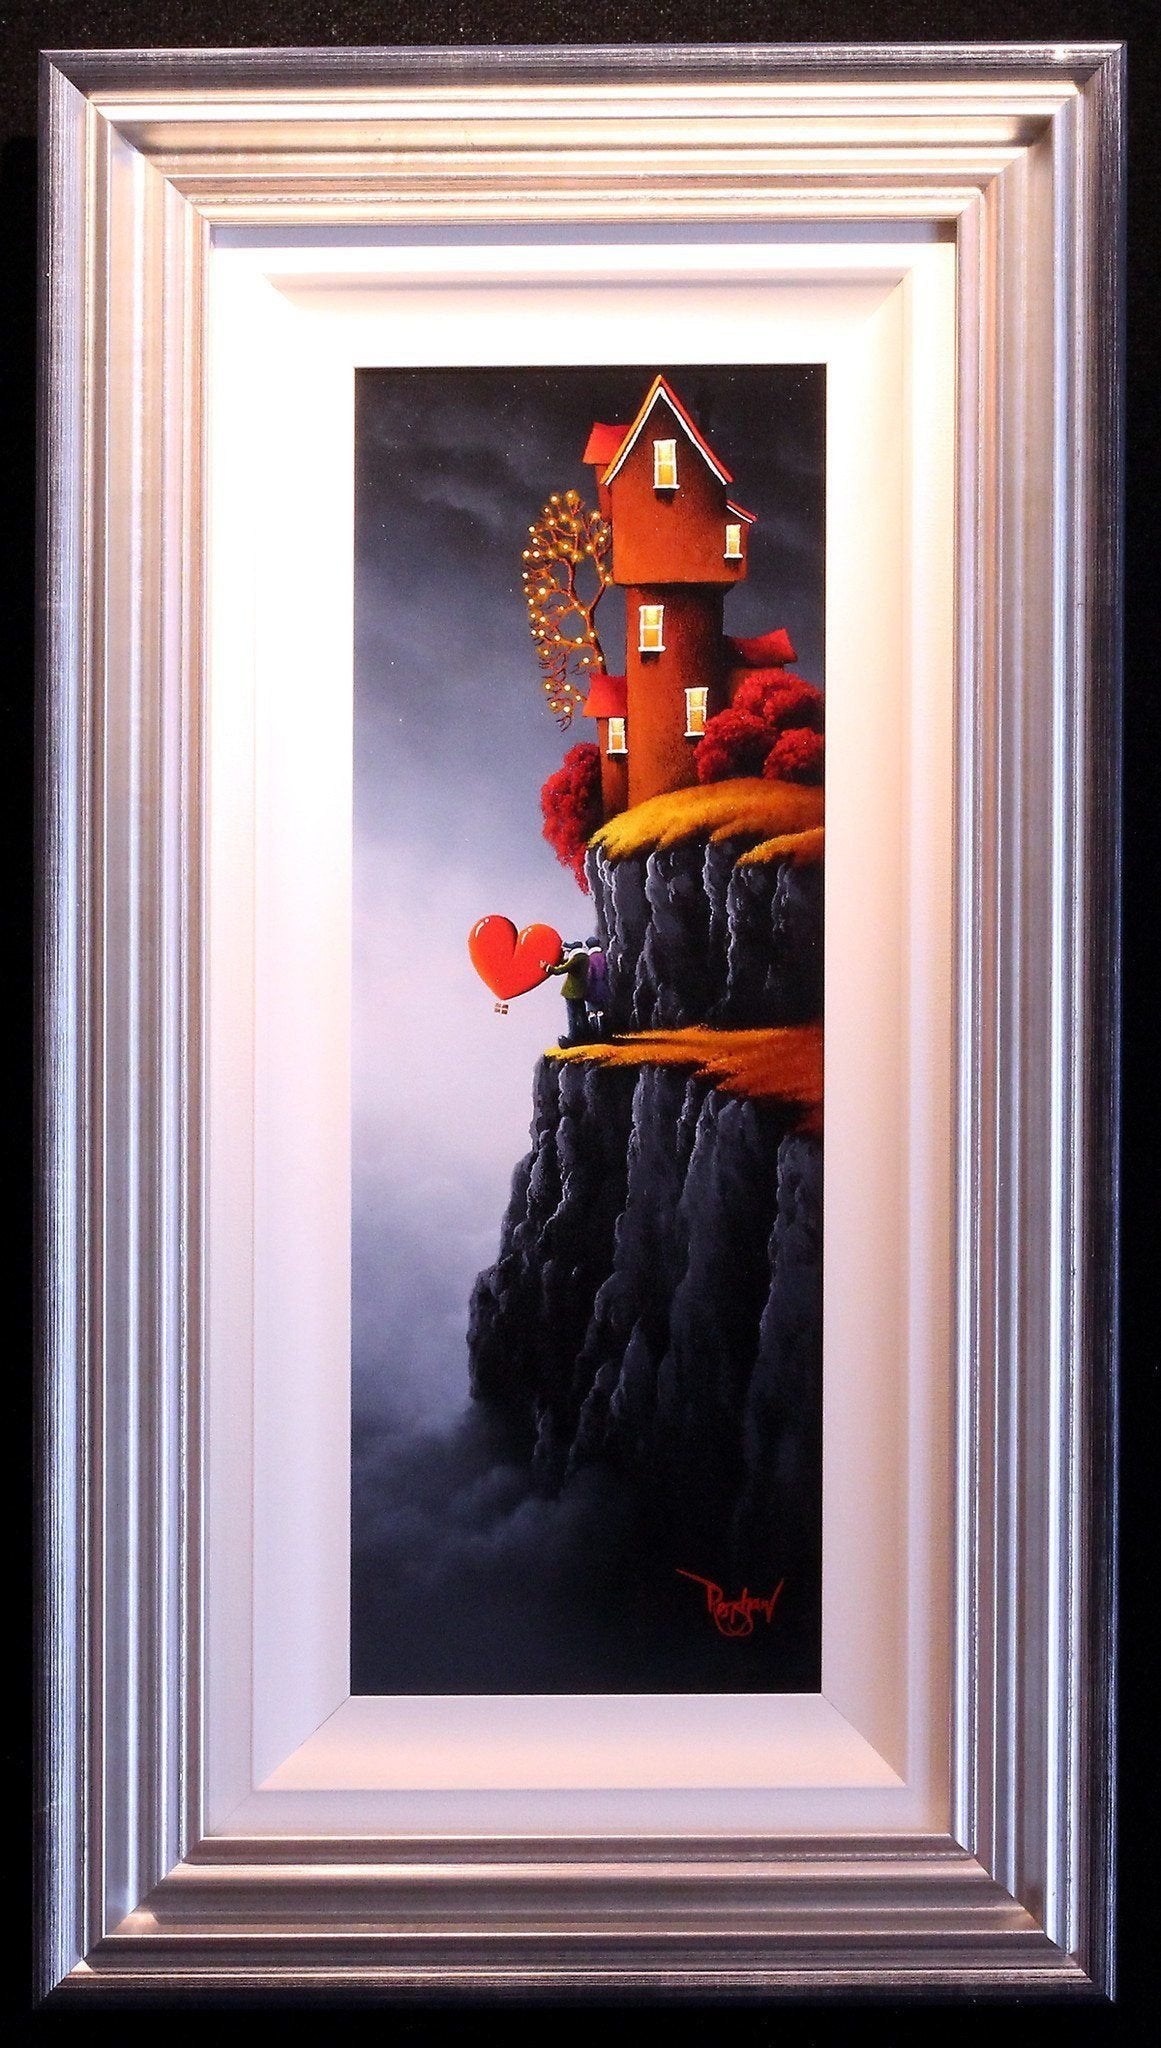 With Love - SOLD David Renshaw